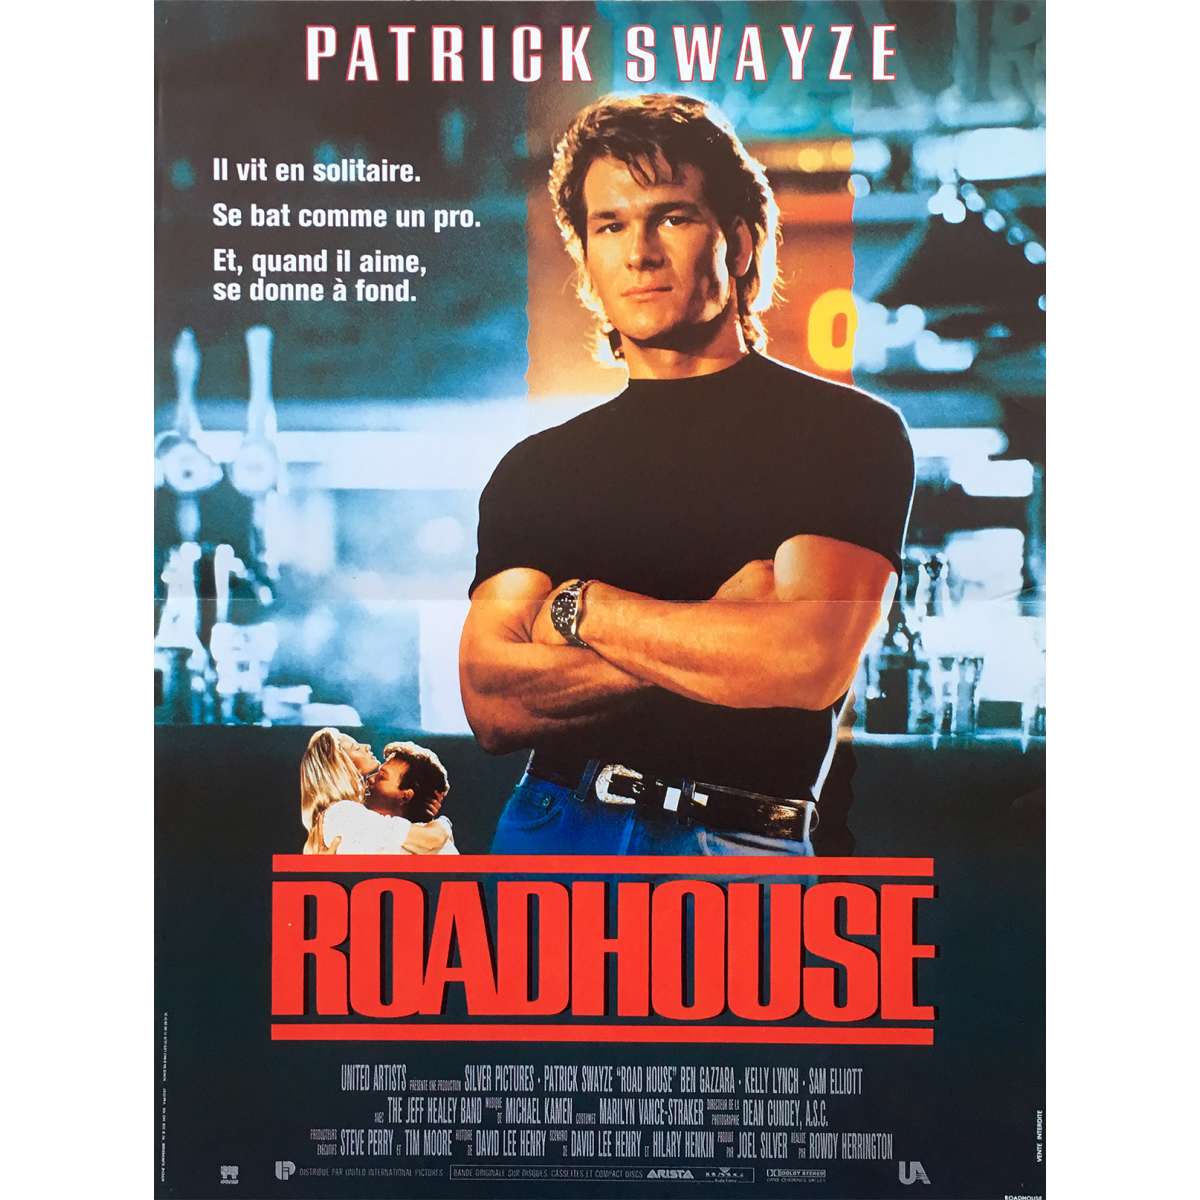 ROADHOUSE Movie Poster 15x21 in.